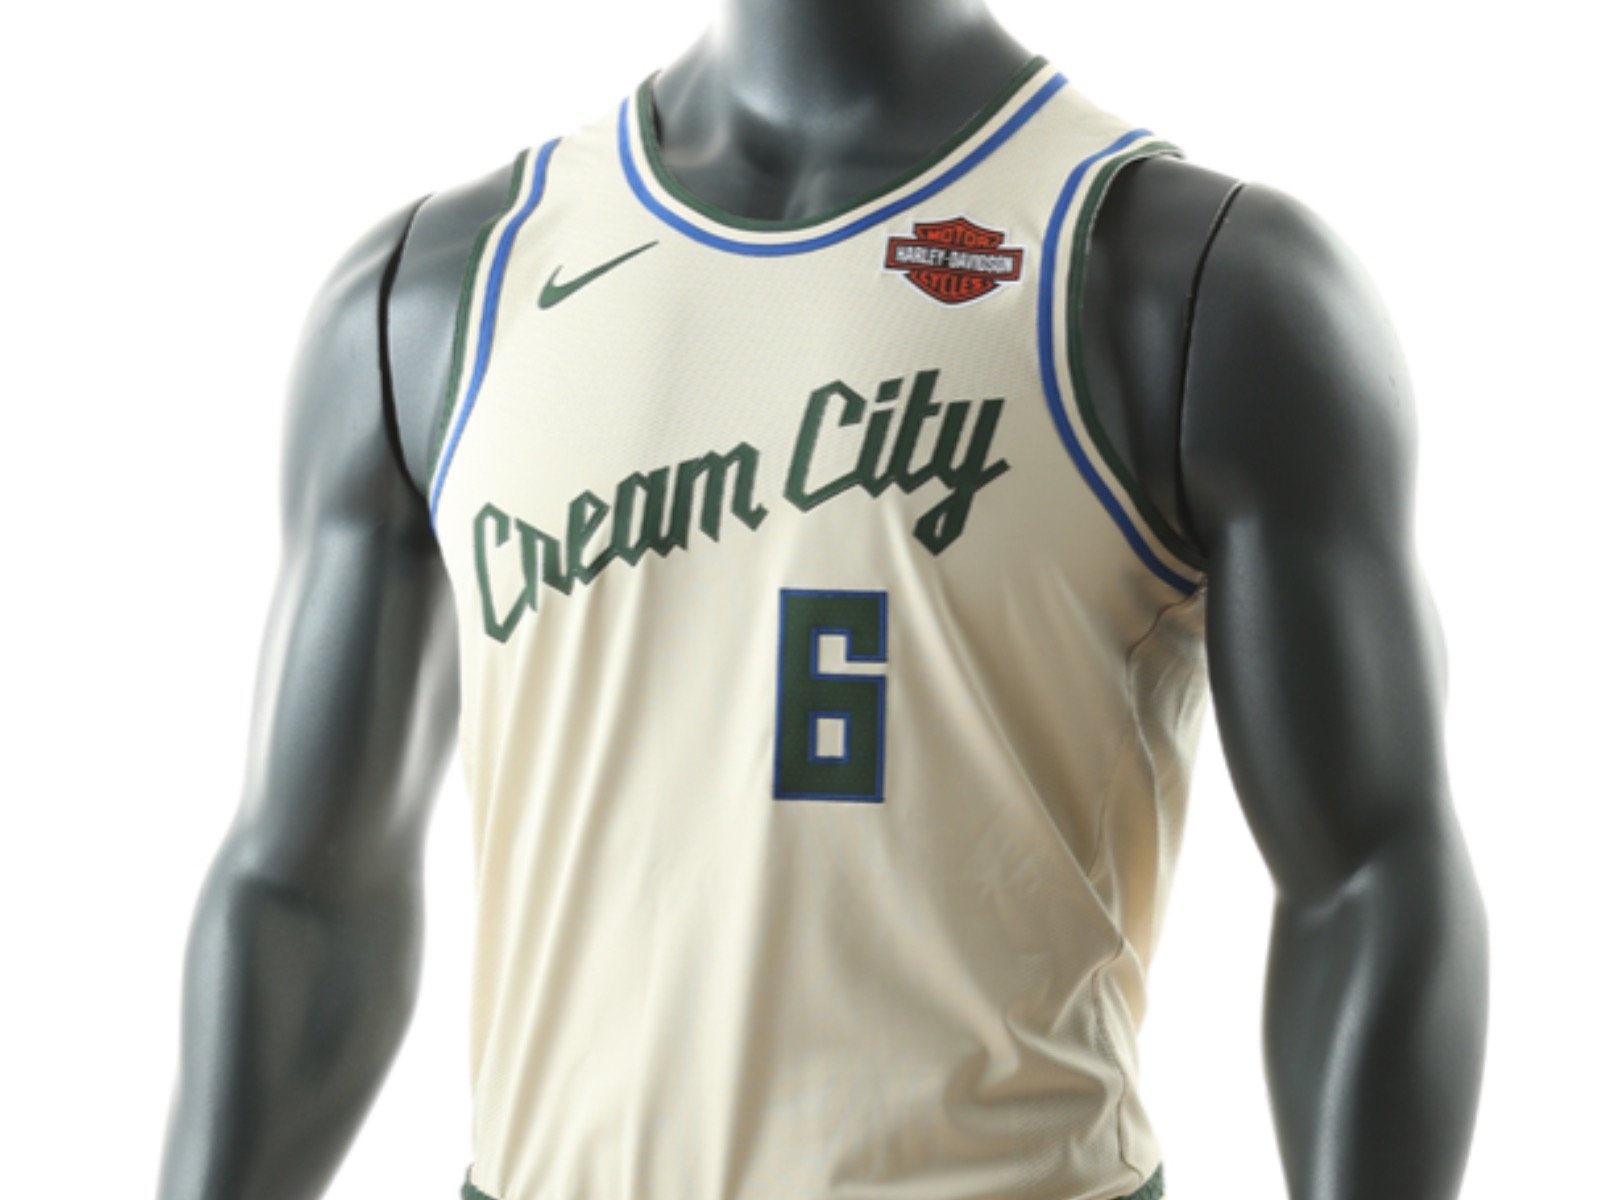 cream city jersey meaning